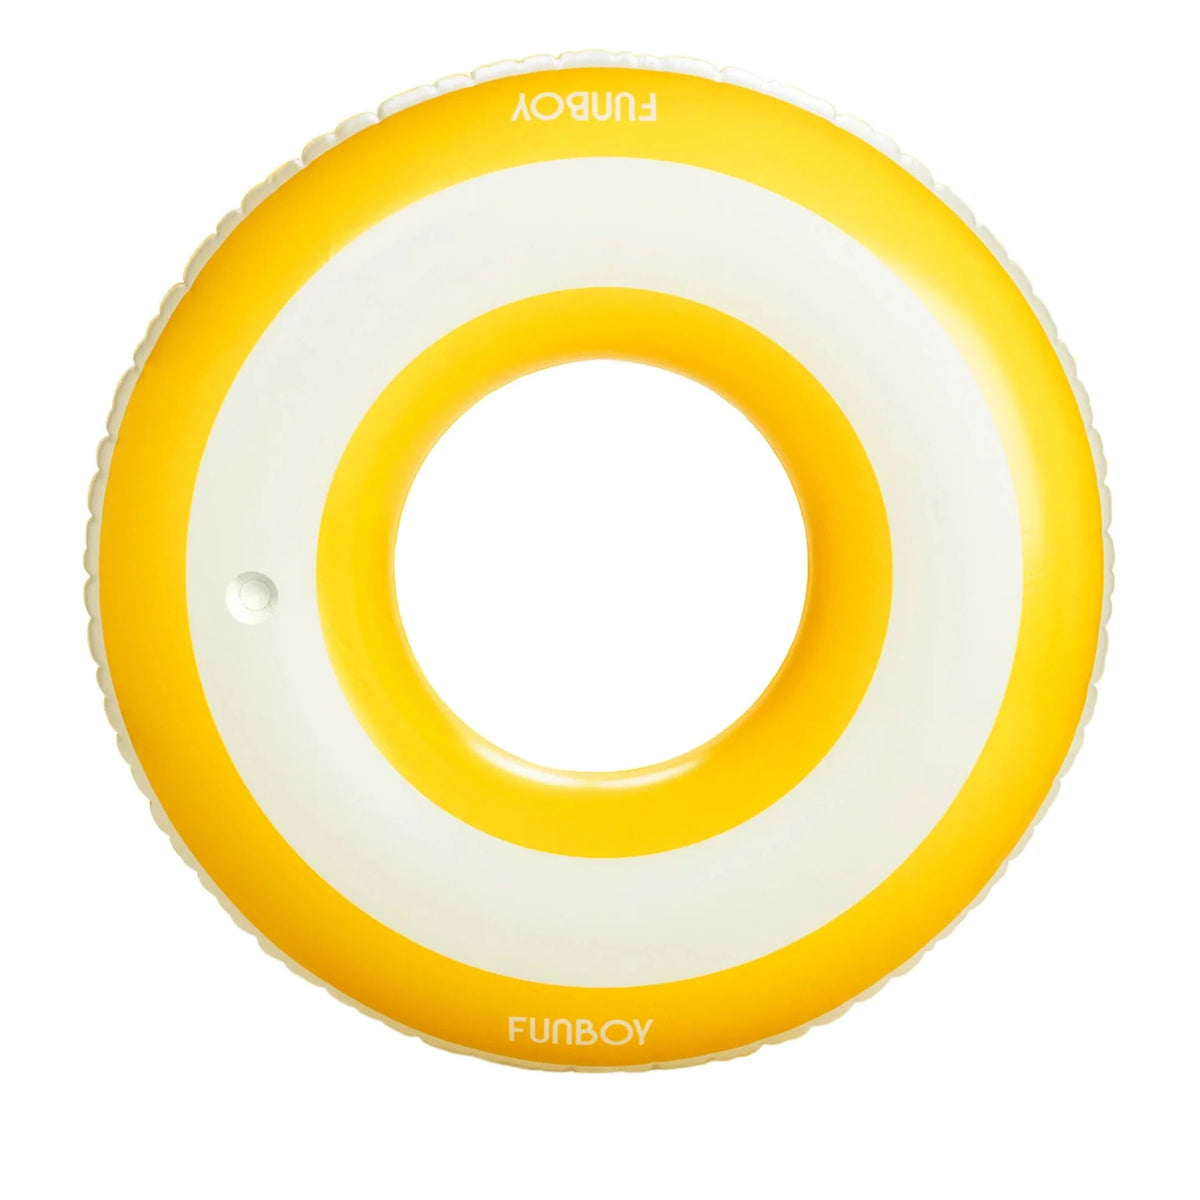 Mellow Yellow Striped Tube Float - The Preppy Bunny